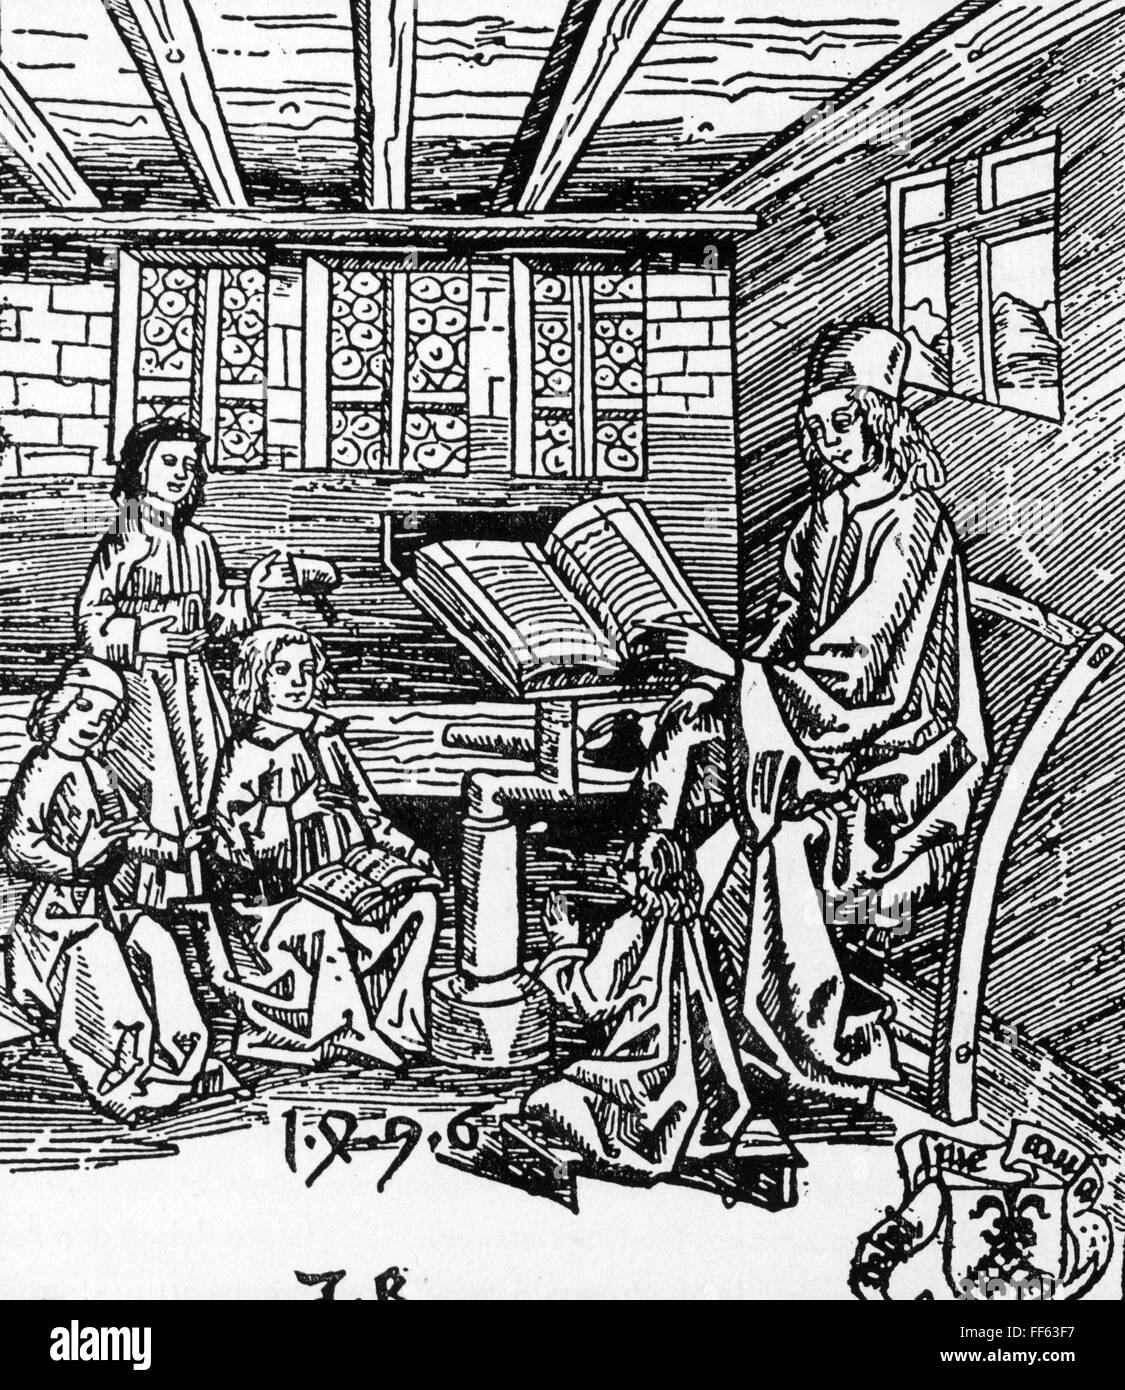 pedagogy, school / lessons / discipline, teacher with pupils, woodcut by master JB, 1496, Additional-Rights-Clearences-Not Available Stock Photo